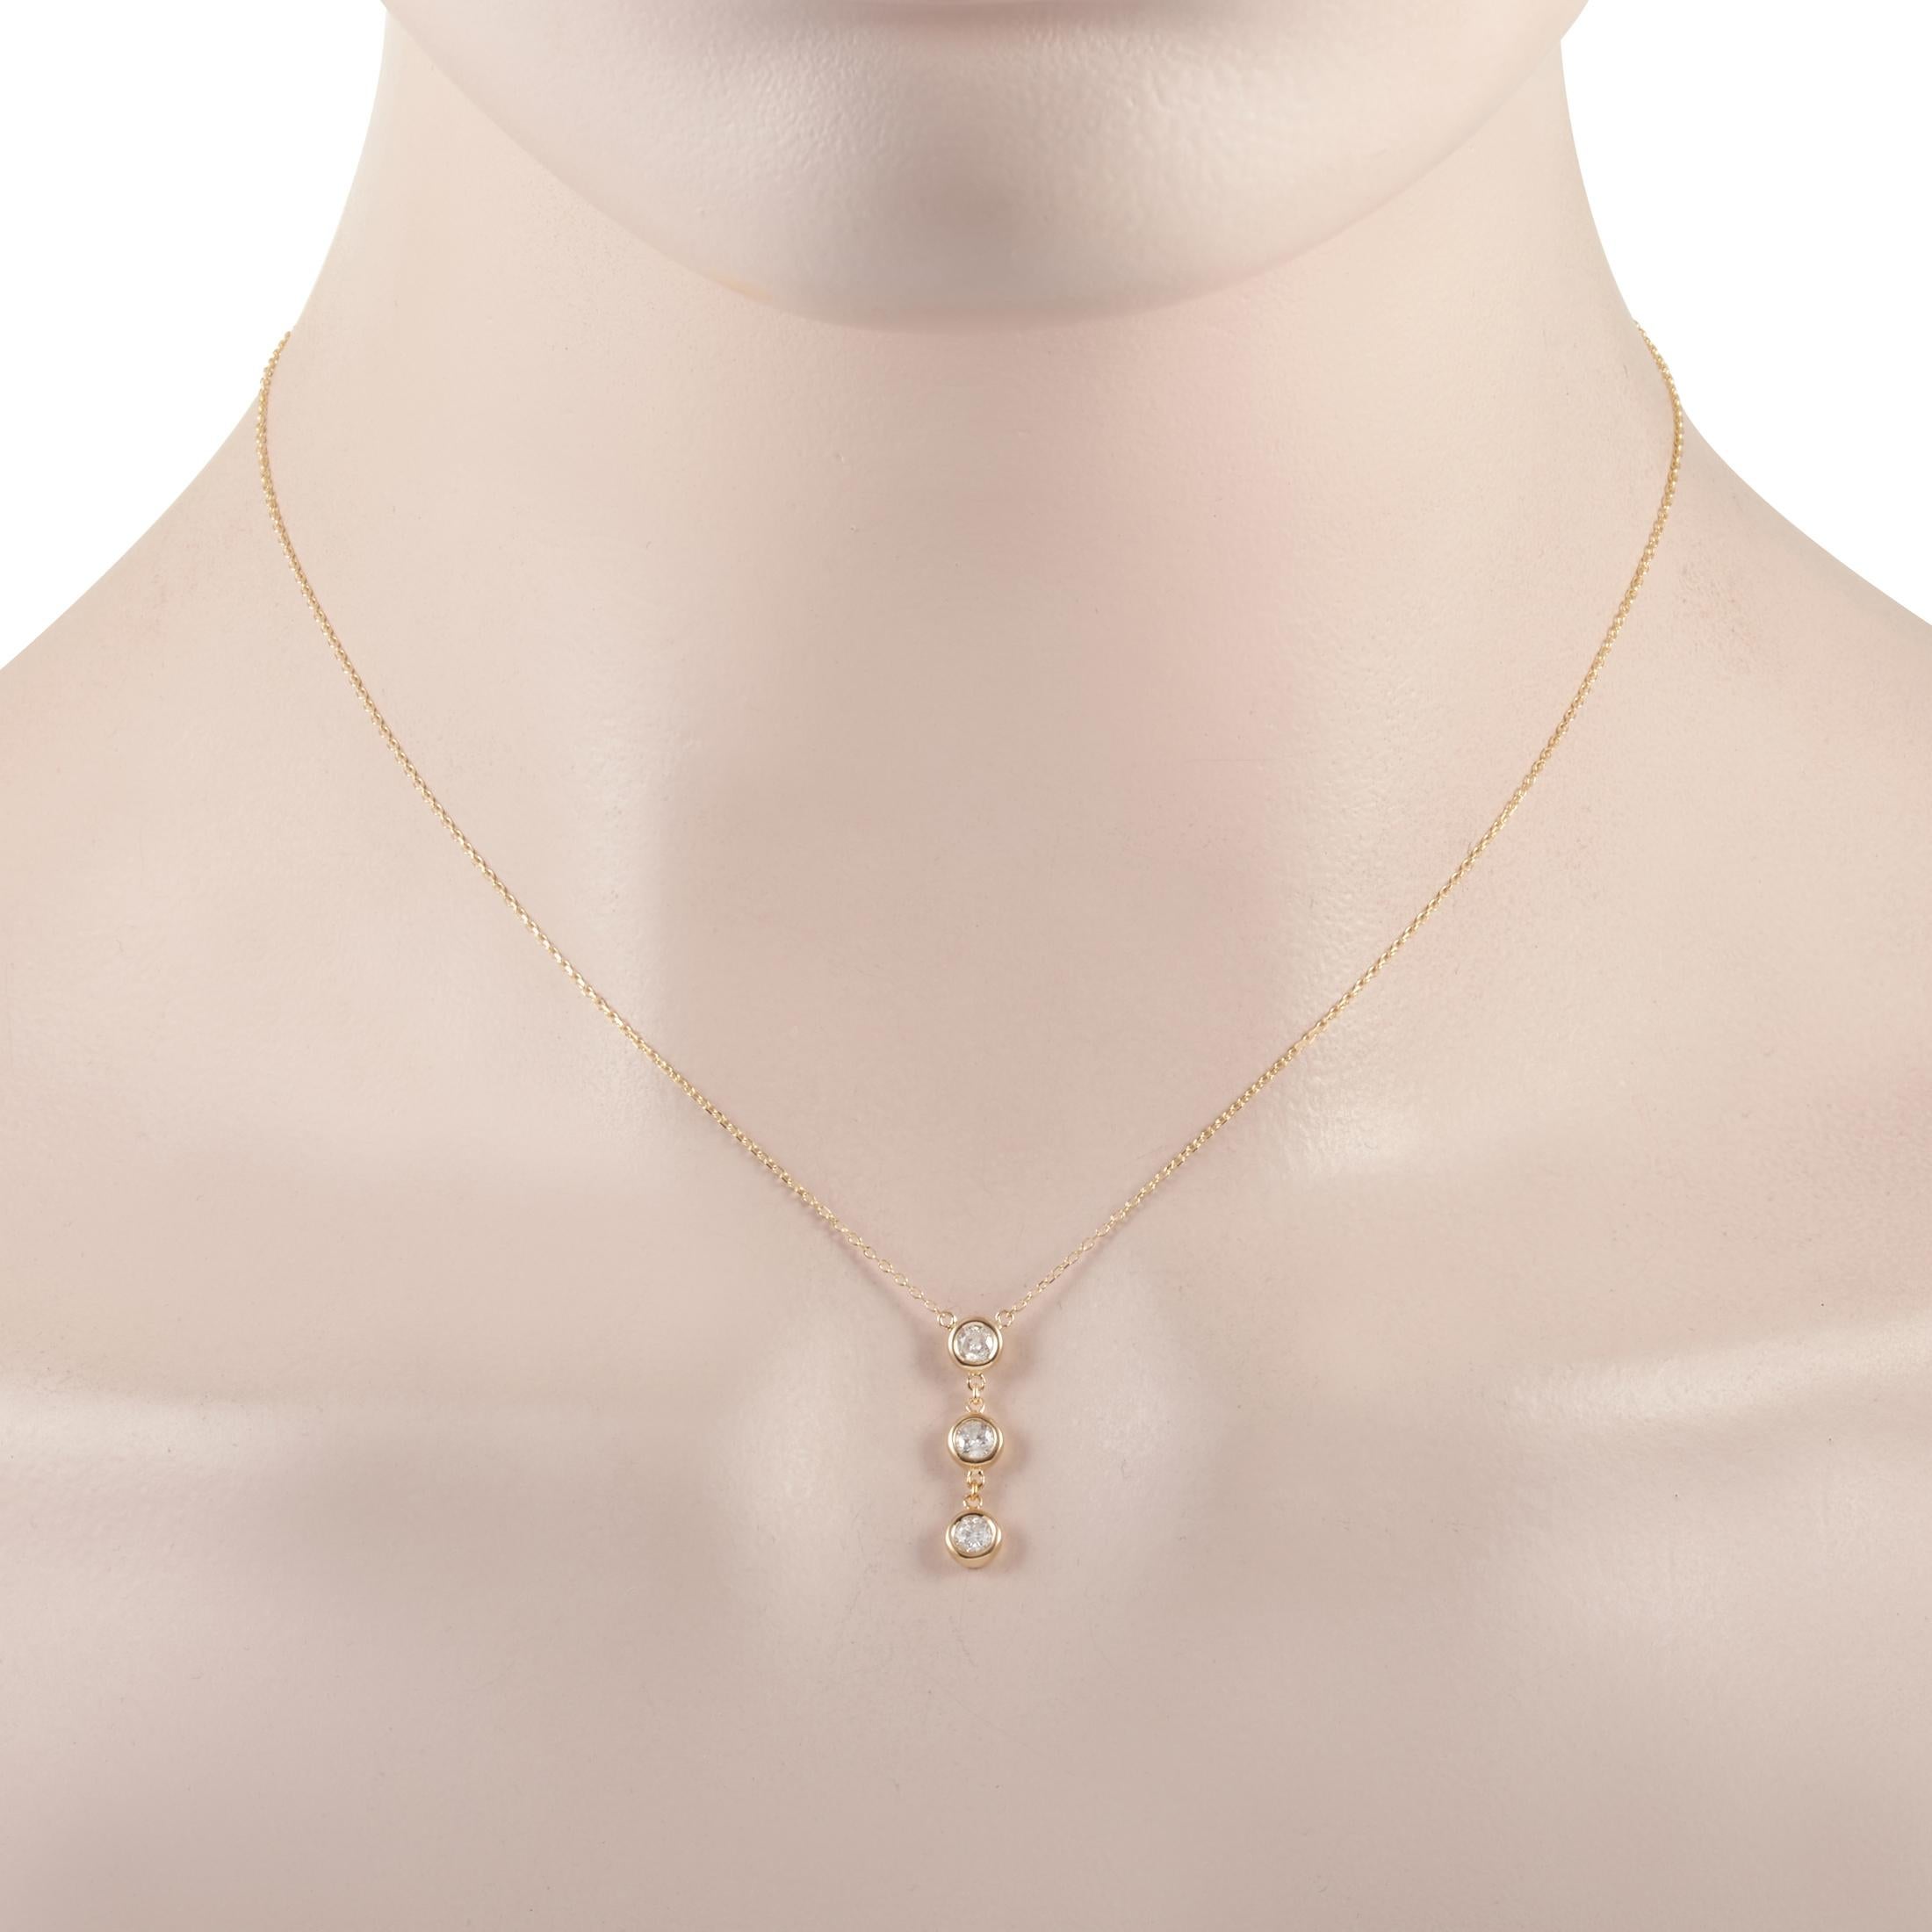 This LB Exclusive necklace is made of 14K yellow gold and embellished with diamonds that amount to 0.35 carats. The necklace weighs 1.9 grams and boasts a 15” chain and a pendant that measures 0.75” in length and 0.13” in width.
 
 Offered in brand